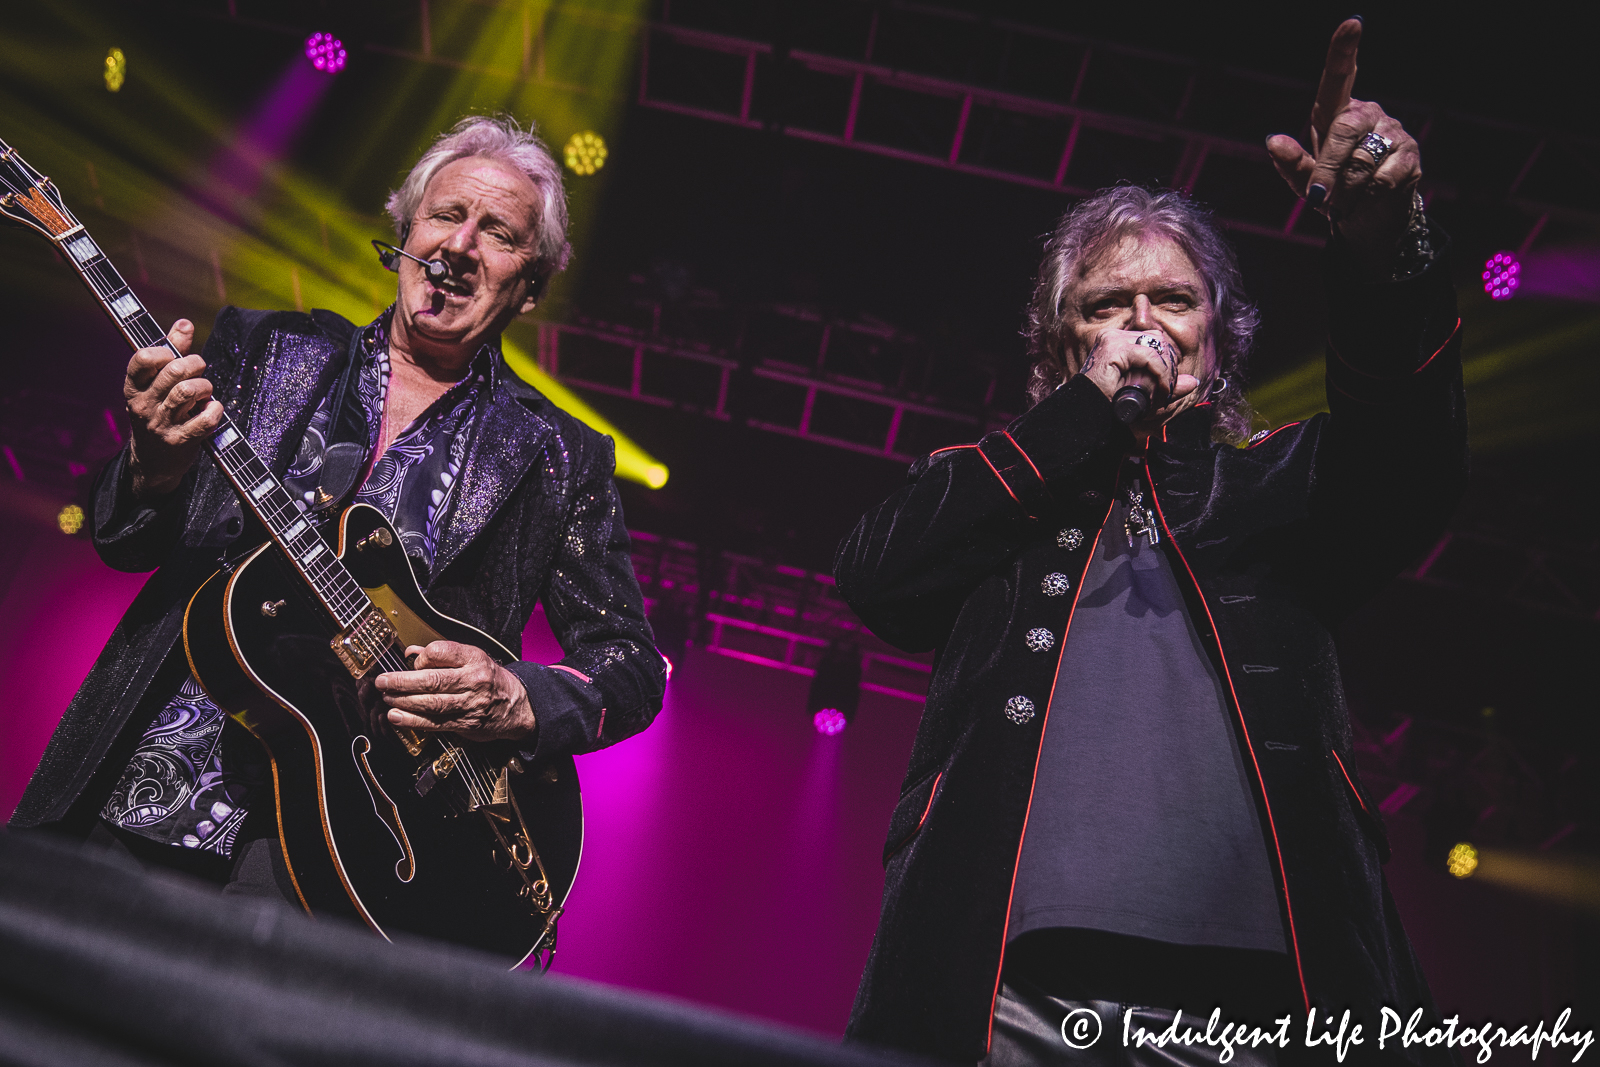 Air Supply member Graham Russell and Russell Hitchcock live in concert together performing "Even the Nights Are Better" at Ameristar Casino Hotel Kansas City on May 5, 2023.